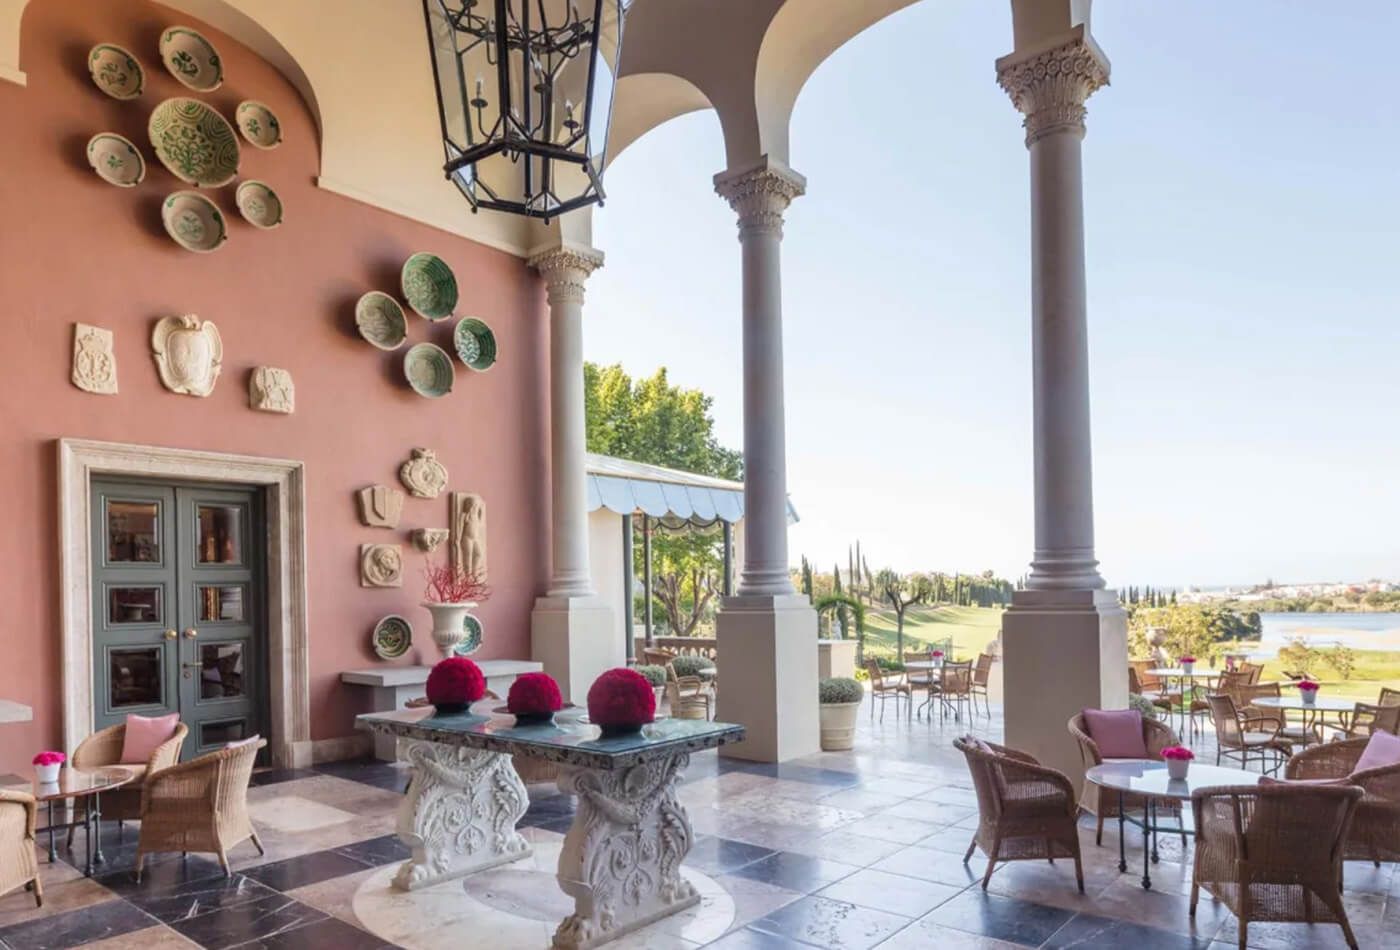 Marble floor terrace with pink pastel walls overlooking a picturesque view of the hotel grounds